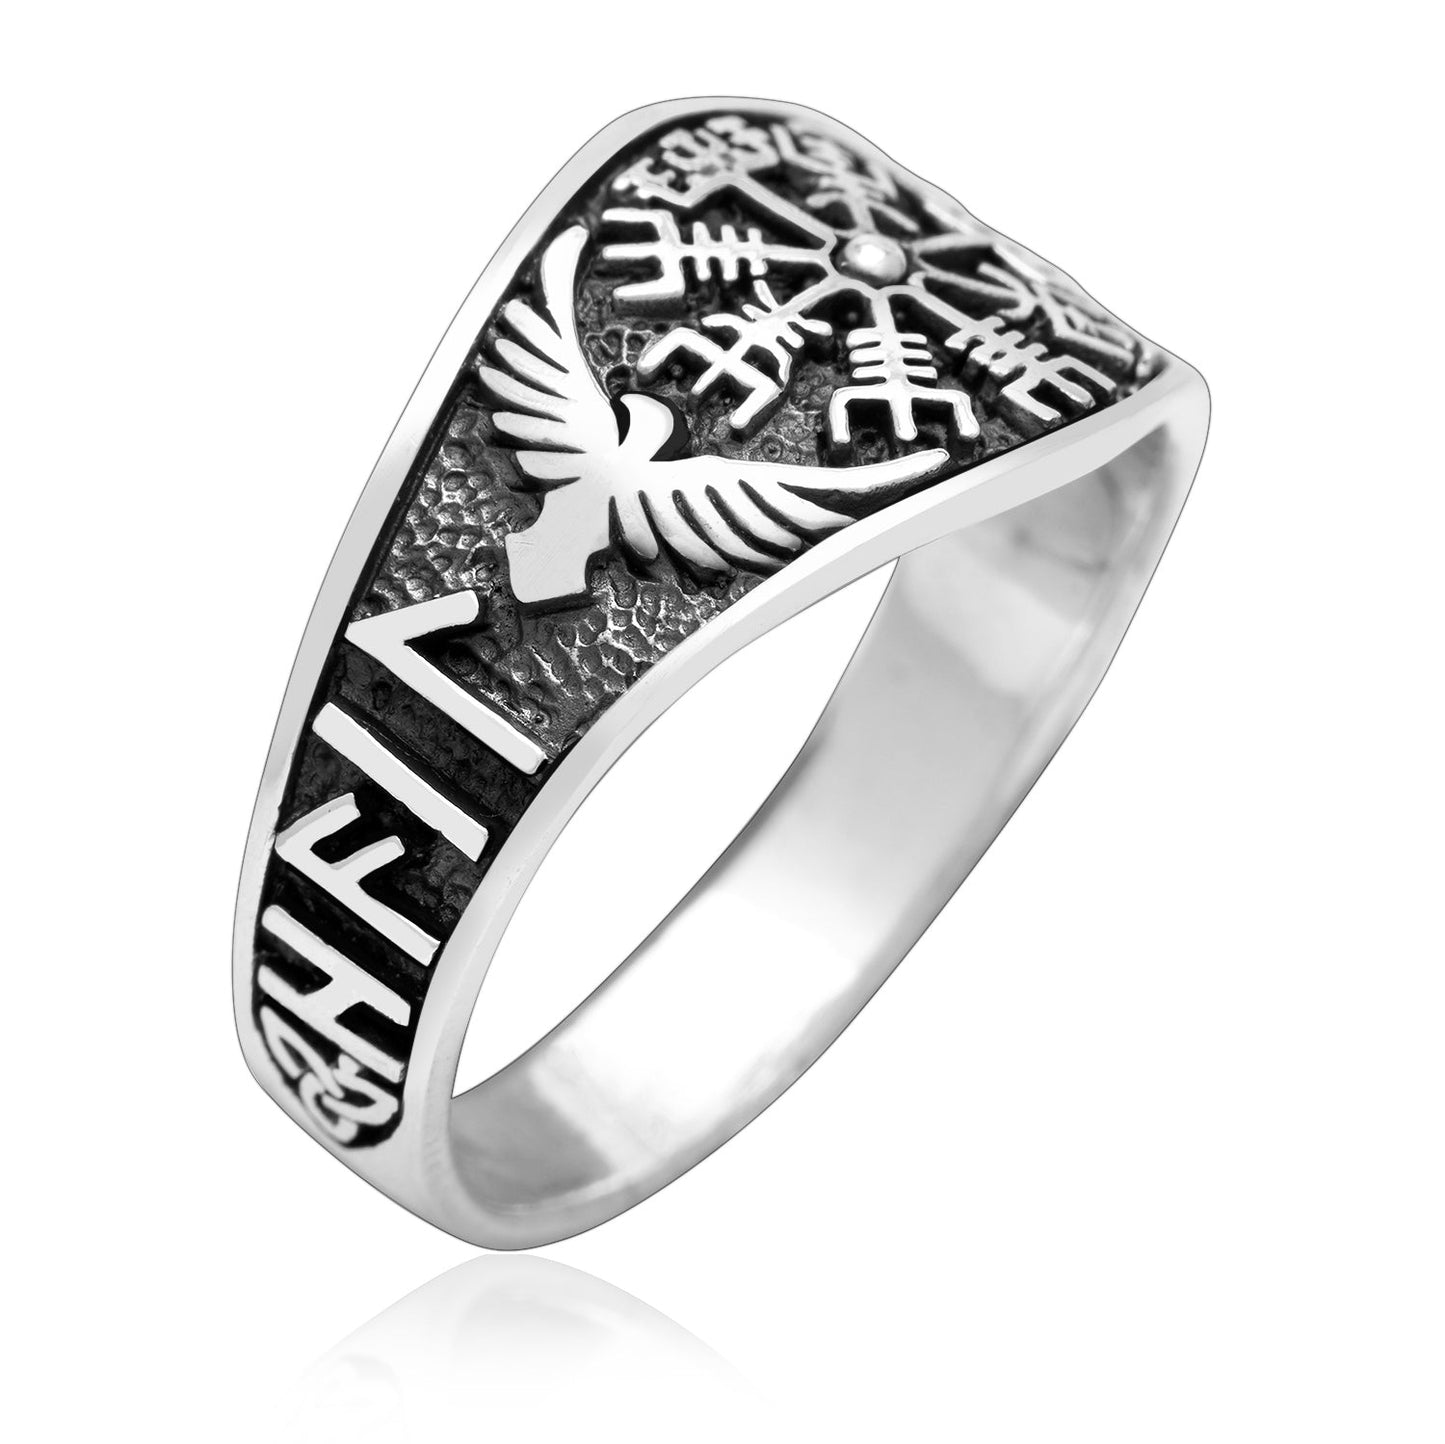 925 Sterling Silver Viking Vegvisir Ring with Raven and Runes - SilverMania925